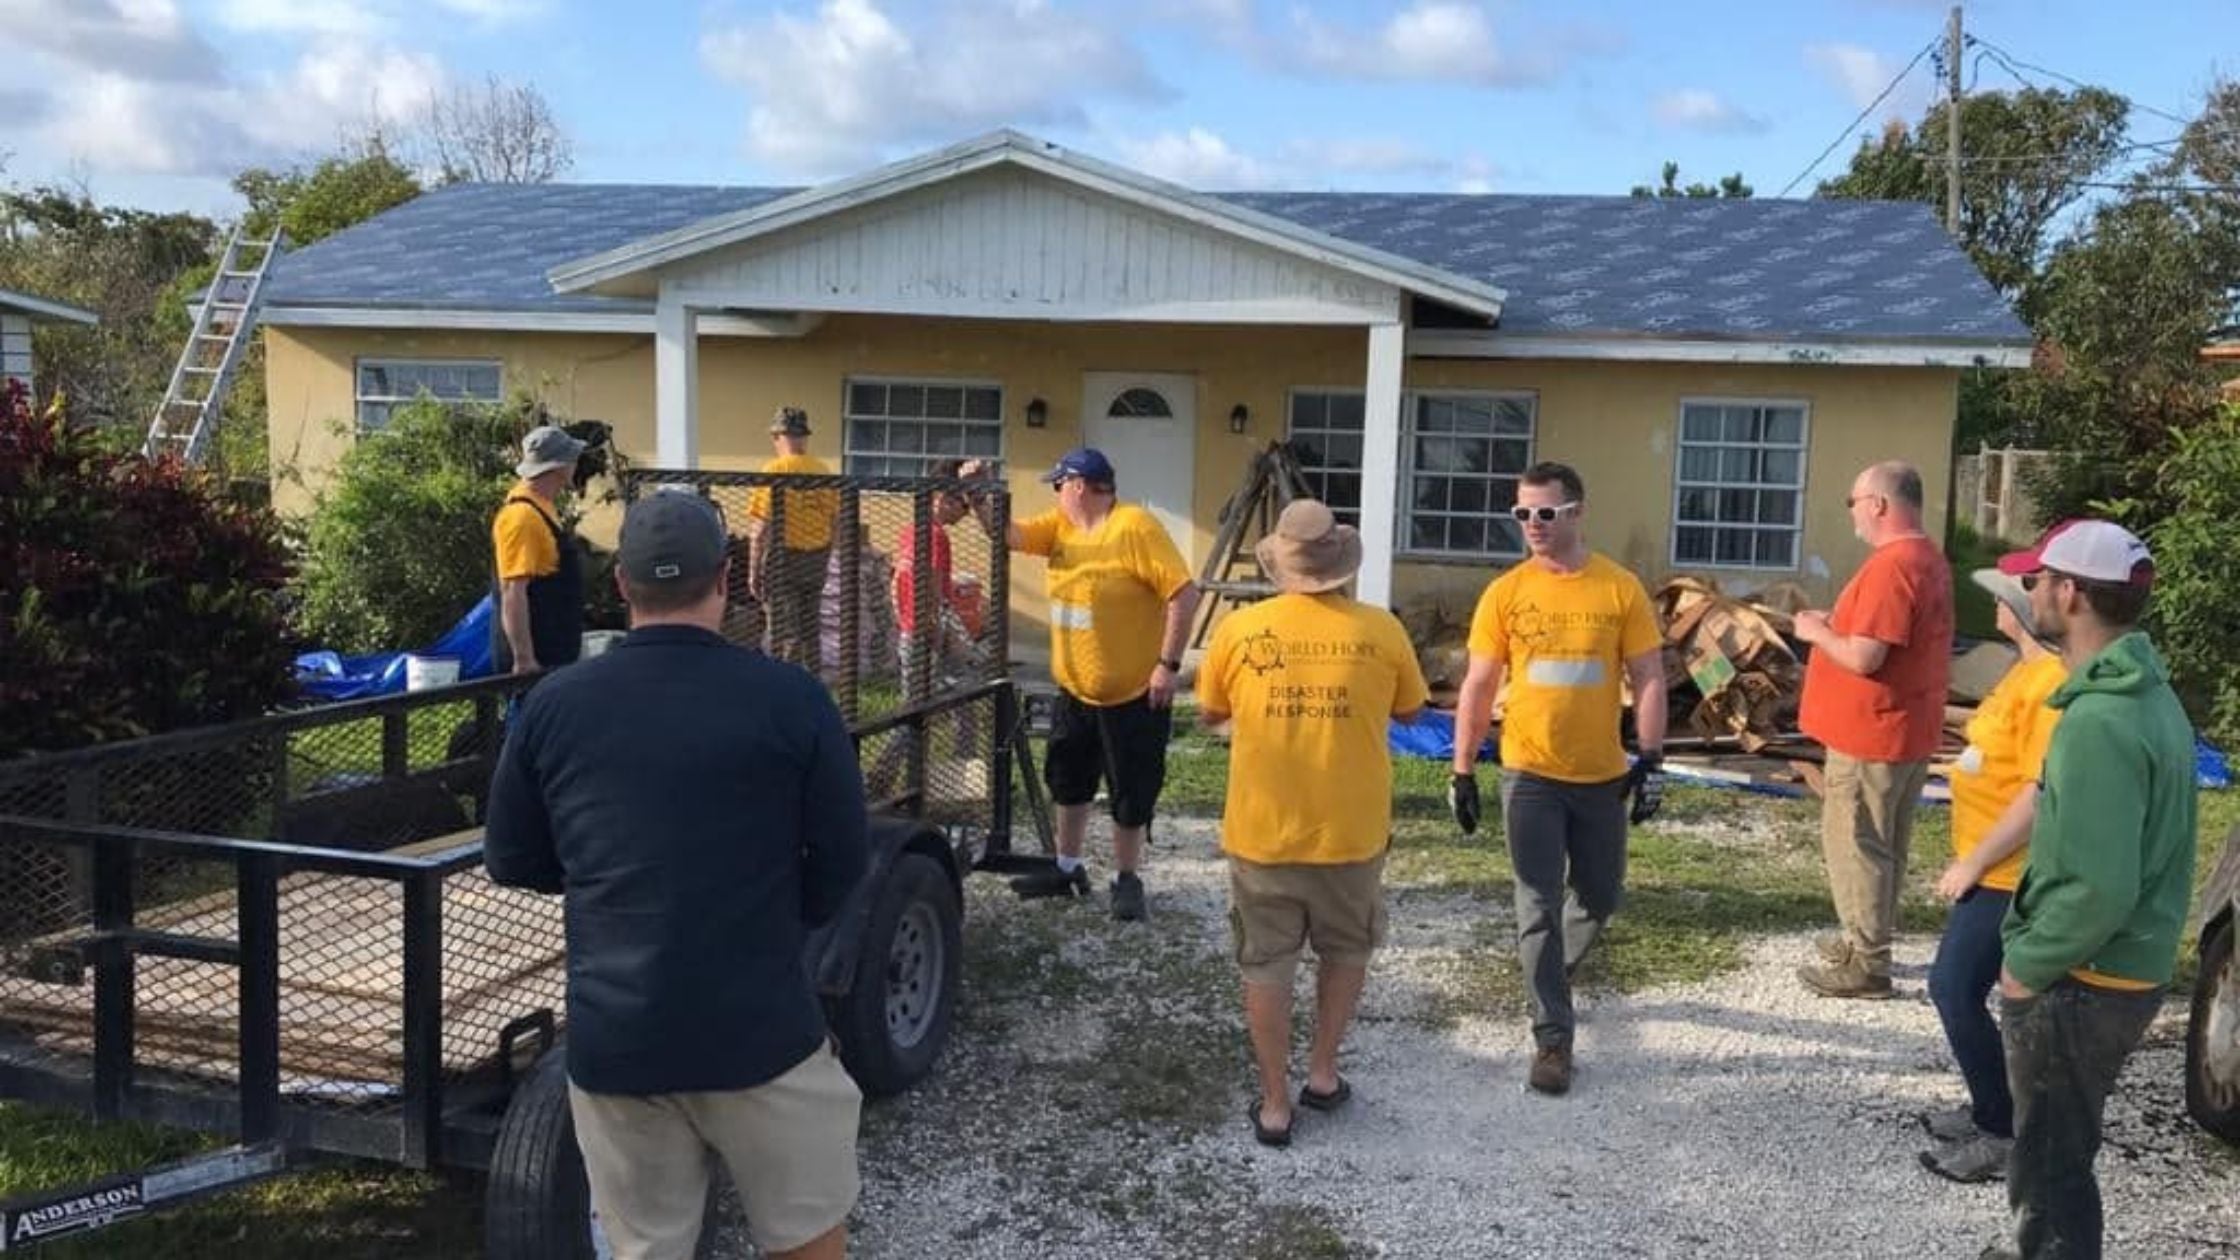 Volunteers helping rebuild a building in the Bahamas after Hurricane Dorian